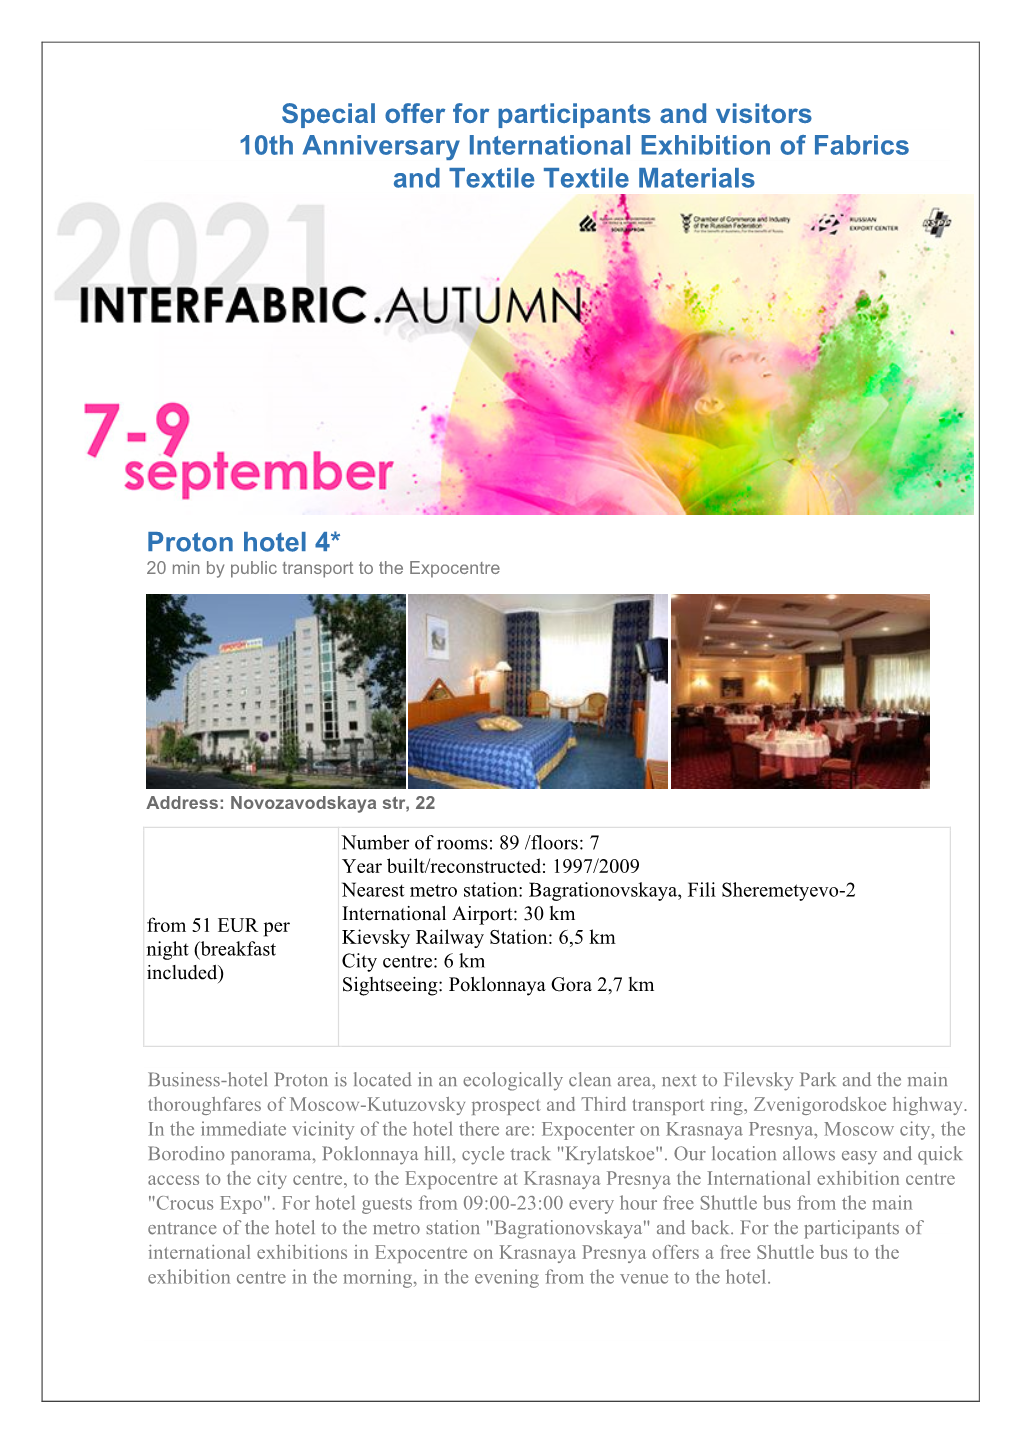 Special Offer for Participants and Visitors 10Th Anniversary International Exhibition of Fabrics and Textile Textile Materials